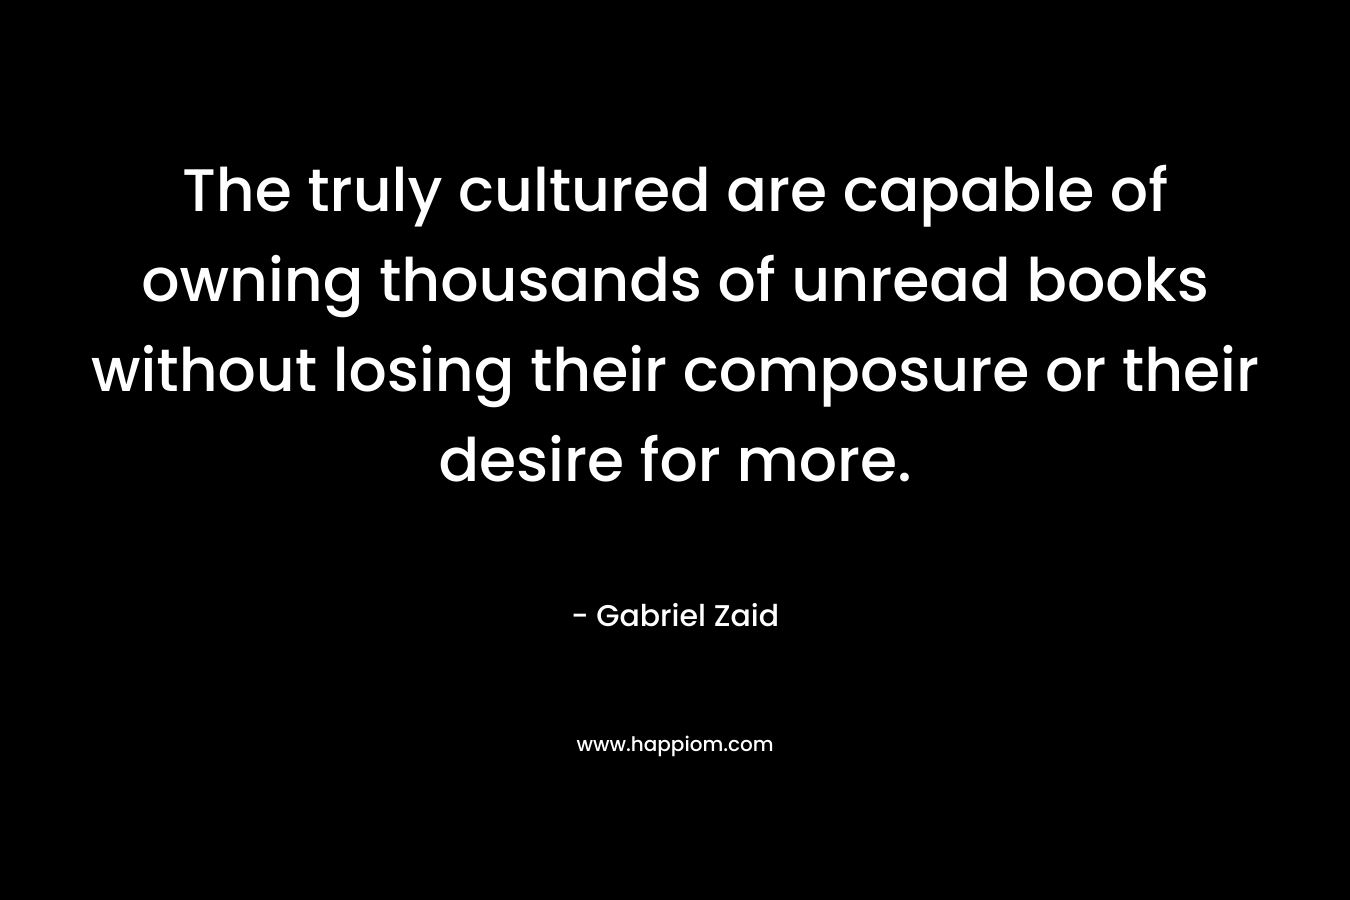 The truly cultured are capable of owning thousands of unread books without losing their composure or their desire for more. – Gabriel Zaid